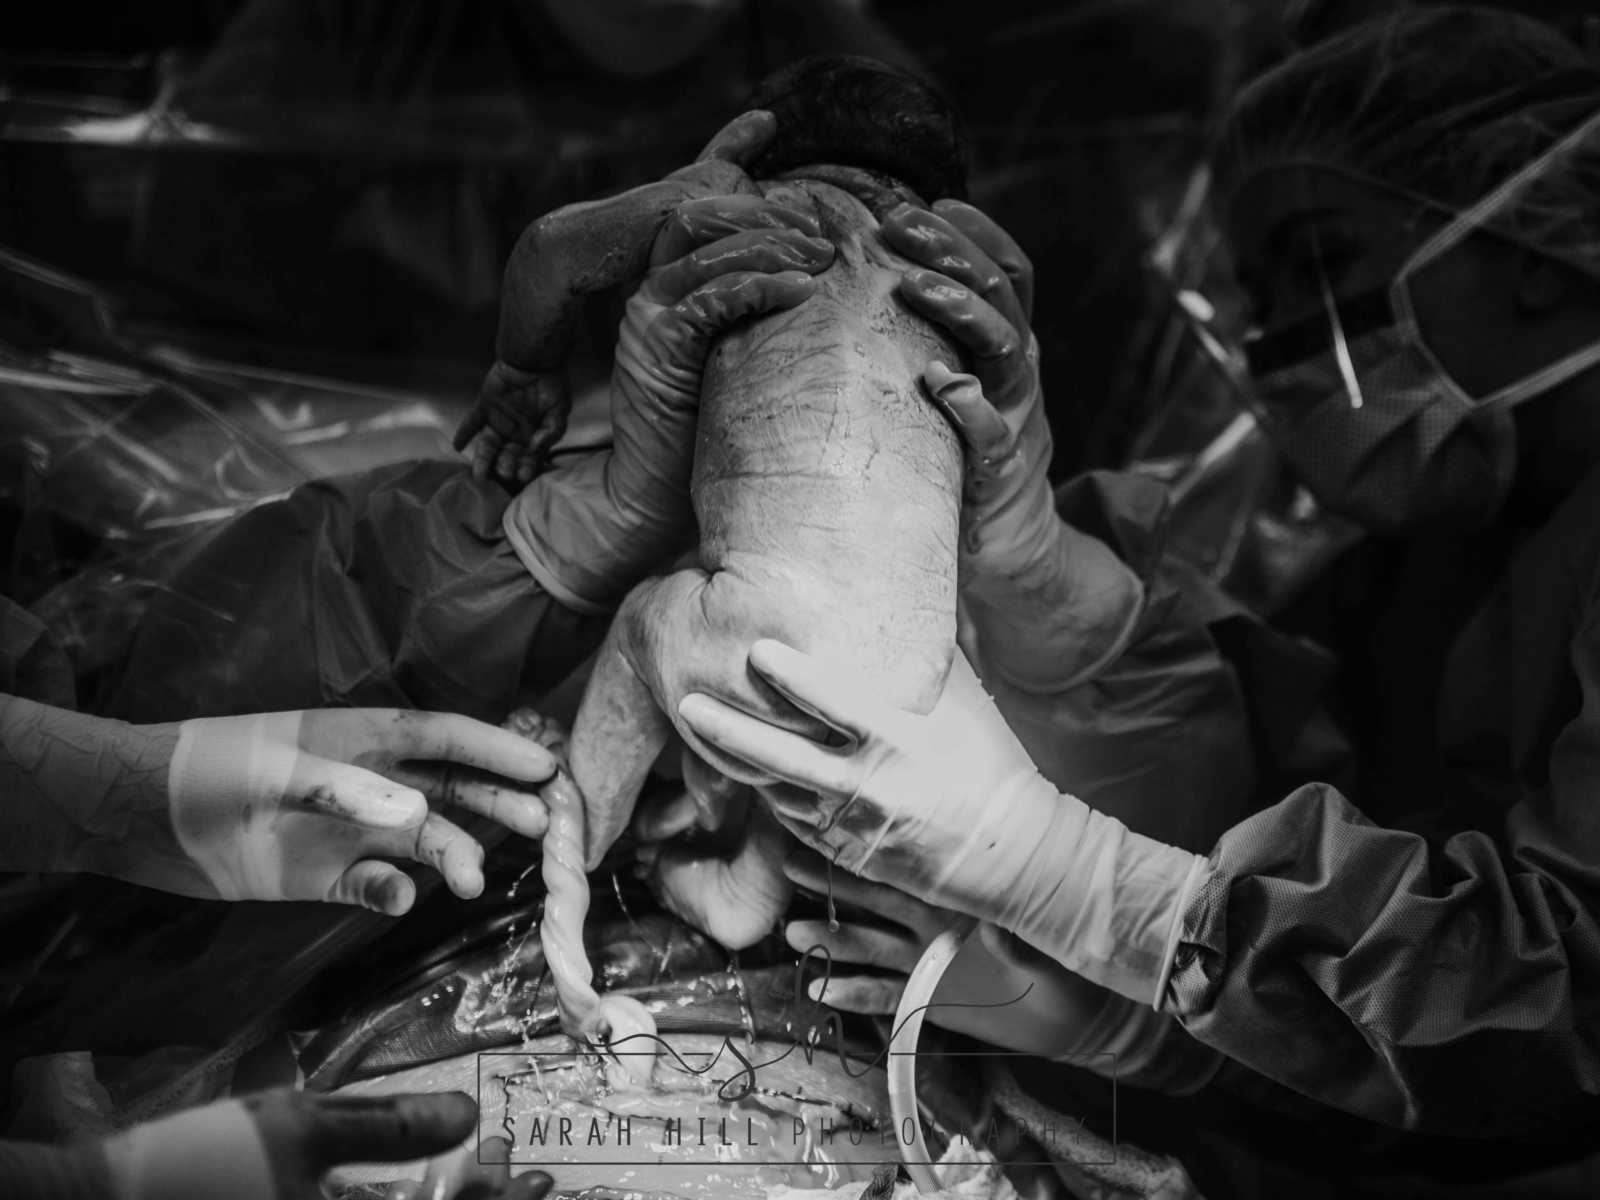 Mother who is also a midwife pulls baby out of her stomach during c-section